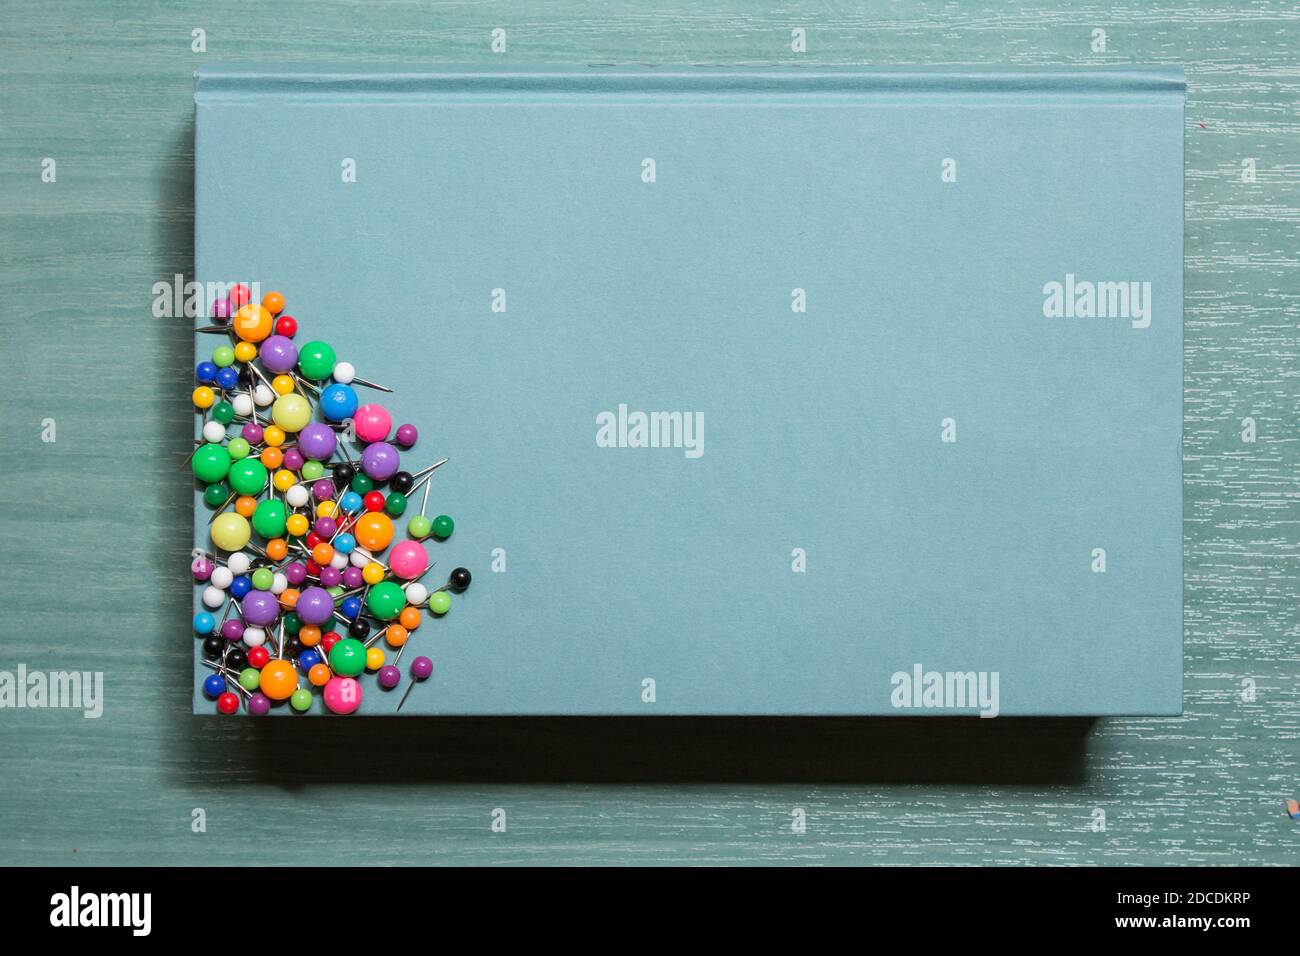 A blue book with push pins of different sizes, shapes, and colors rests on a beautiful wooden table. Stock Photo